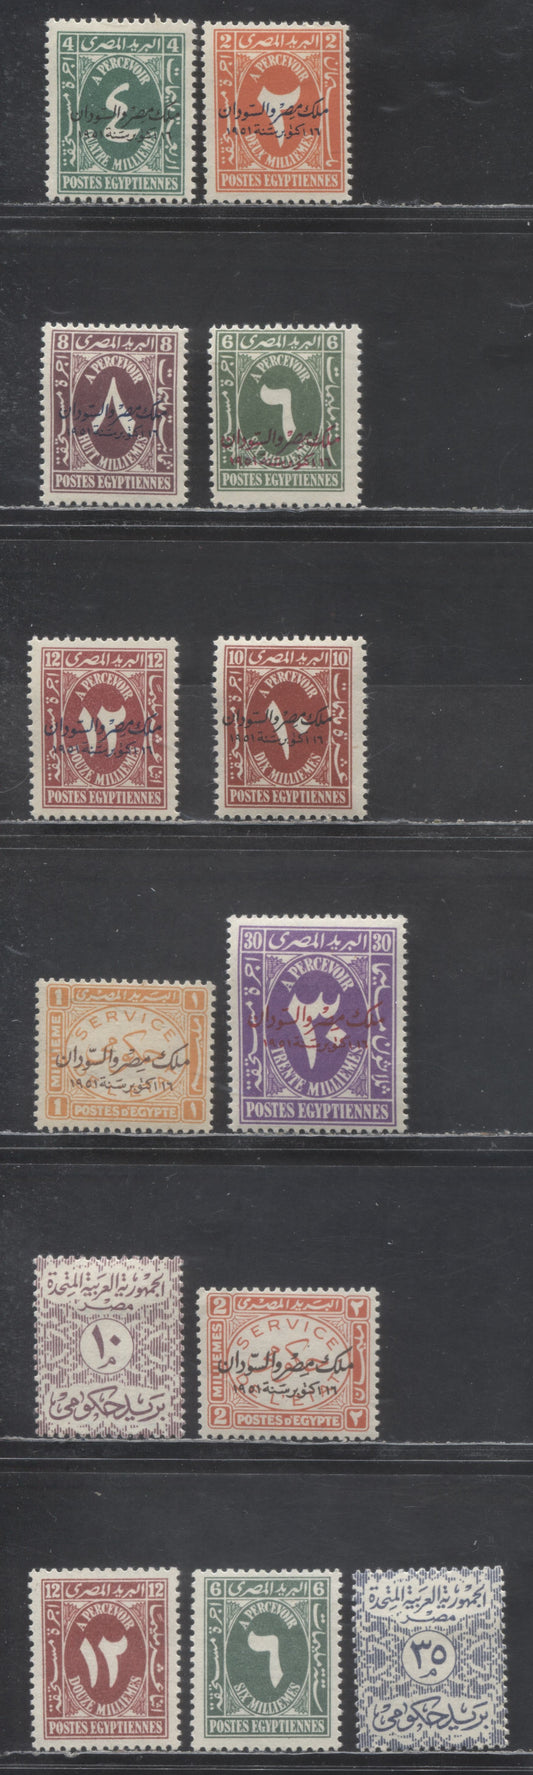 Lot 407 Egypt SC#J40/O70 1952-1960 Postage Dues - Officials, 13 F/VFOG Singles, Click on Listing to See ALL Pictures, Estimated Value $15